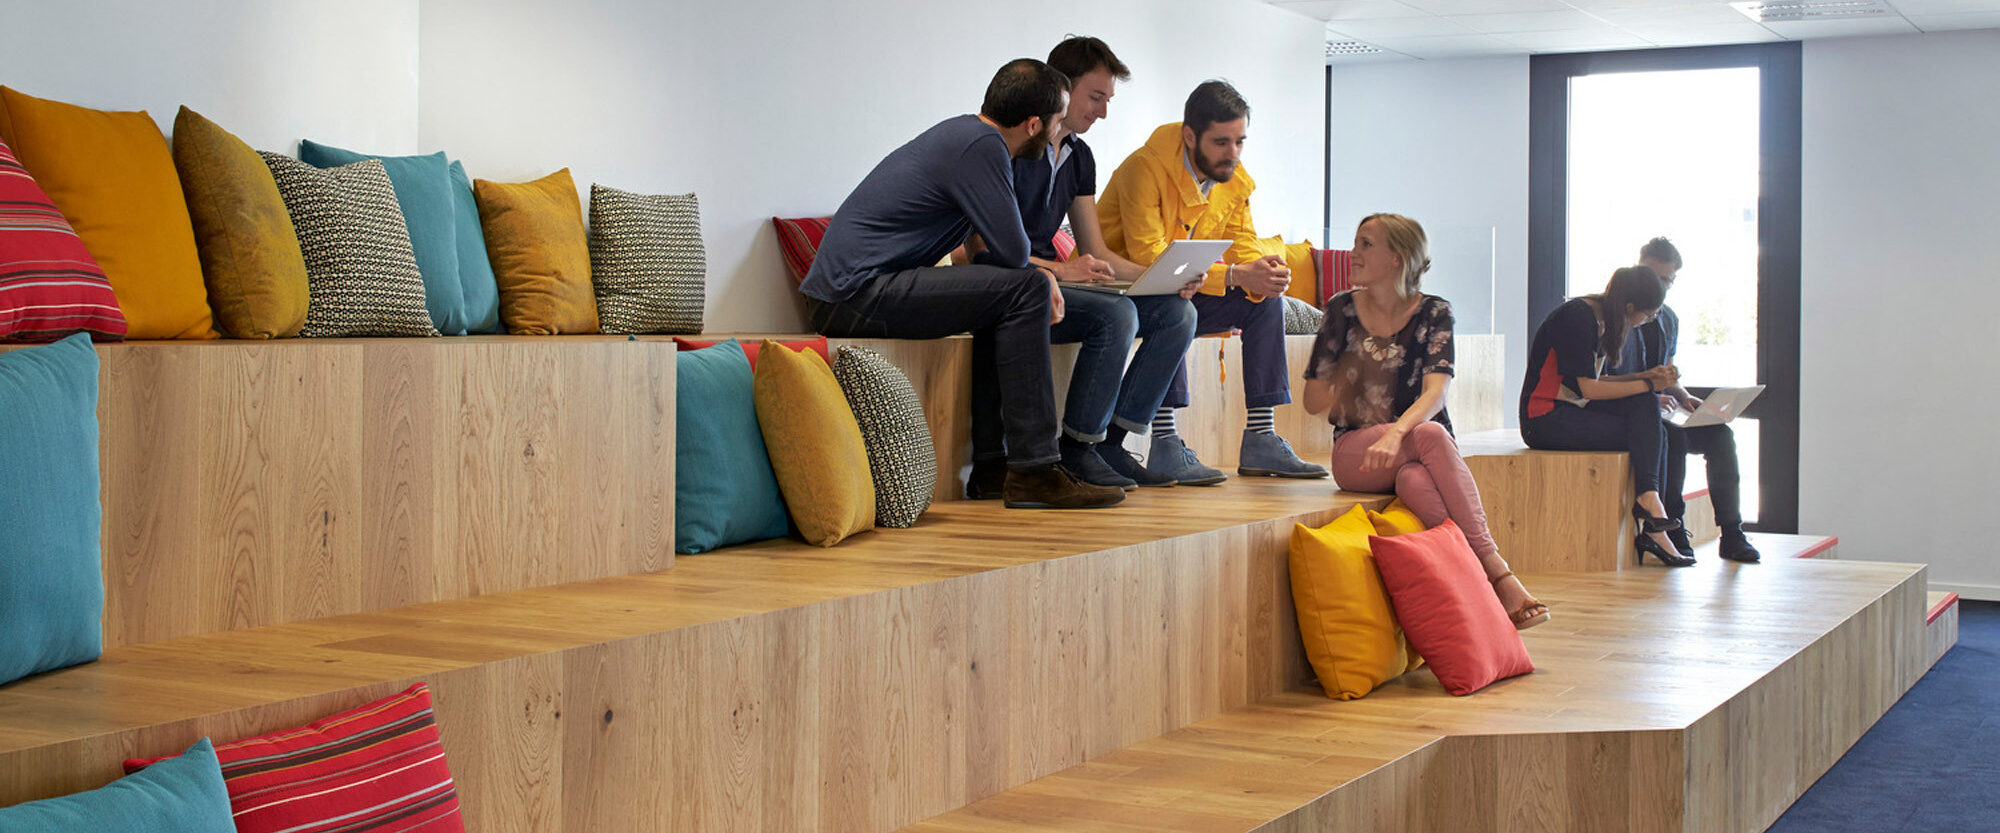 Modern office breakout area with tiered wooden seating steps adorned with colorful cushions. Employees casually engage in conversation, encouraging a collaborative and relaxed workplace atmosphere. Natural light enhances the warm tones of wood, complementing the vibrant fabric hues.